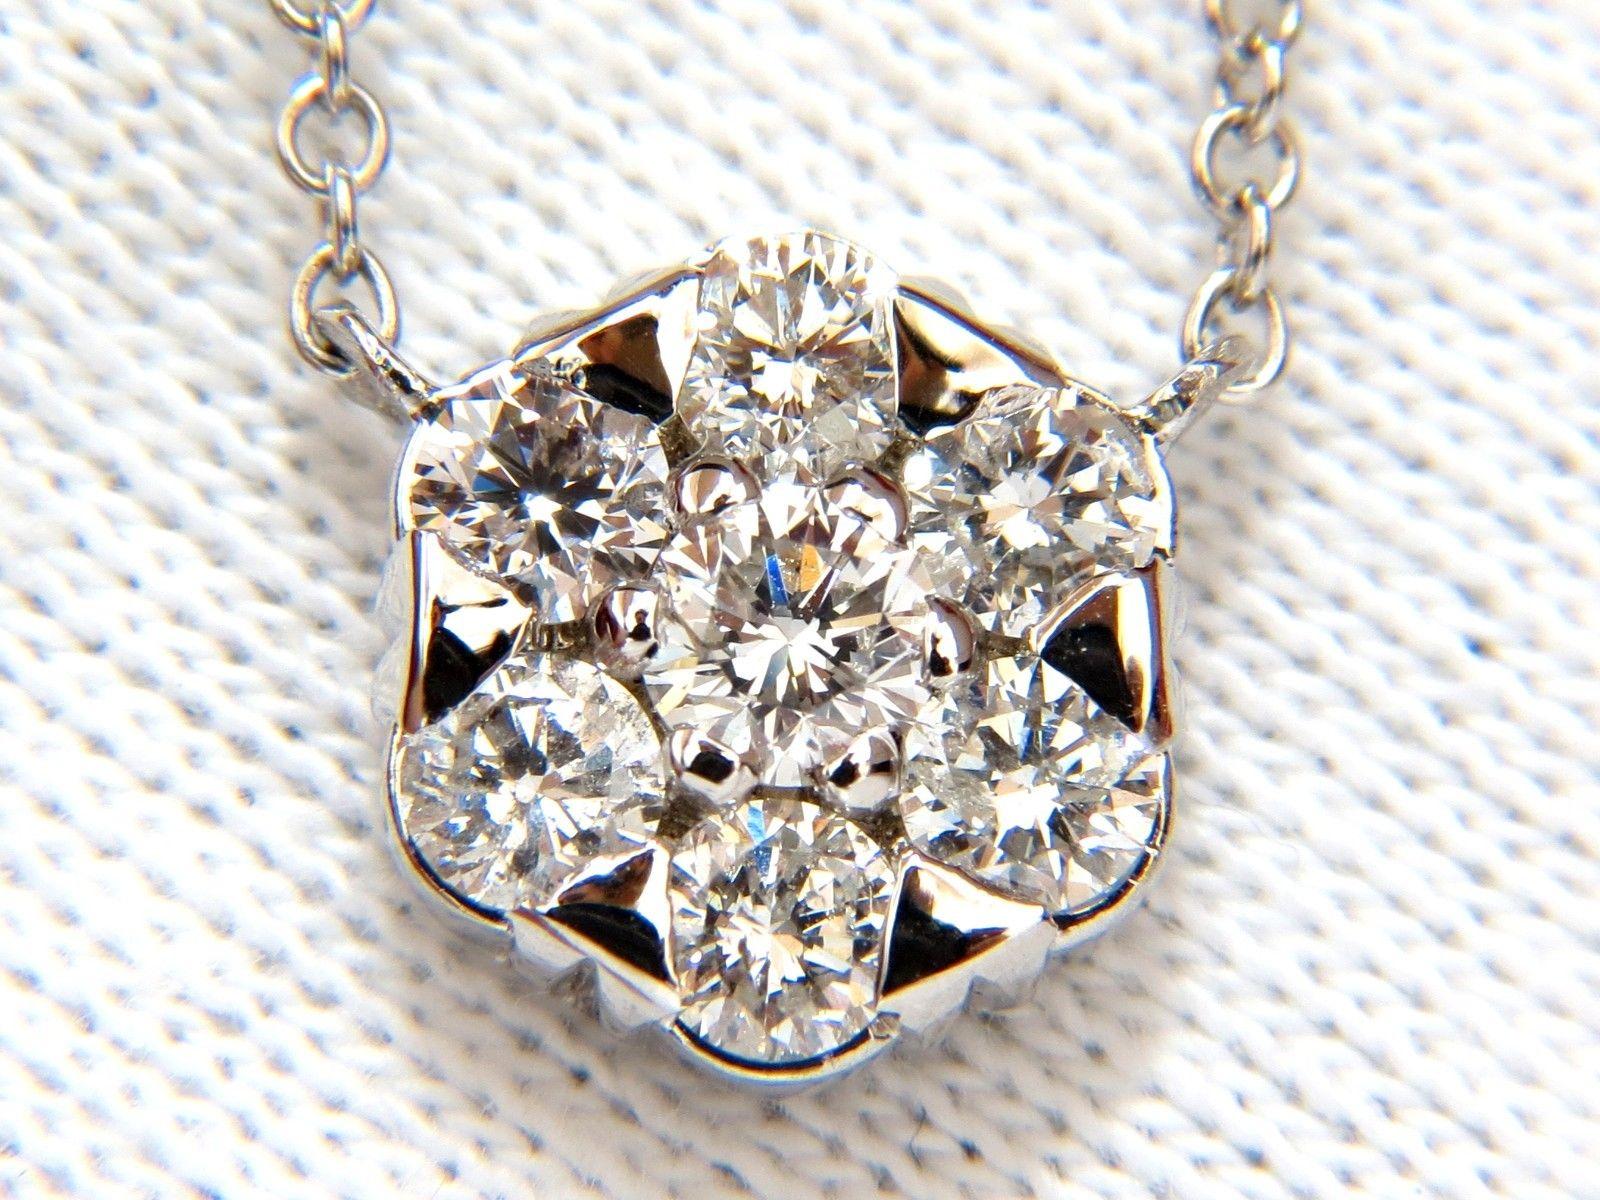 Aside from standard

 1.08ct. Diamonds cluster necklace:

7 diamonds in cluster

All diamonds: full cut & rounds

H color, Vs-2 Si-1 clarity.

14kt. white gold. 

4.5 grams

Diameter: 11mm

16 inches long.

please see all photos 

$3800 Appraisal